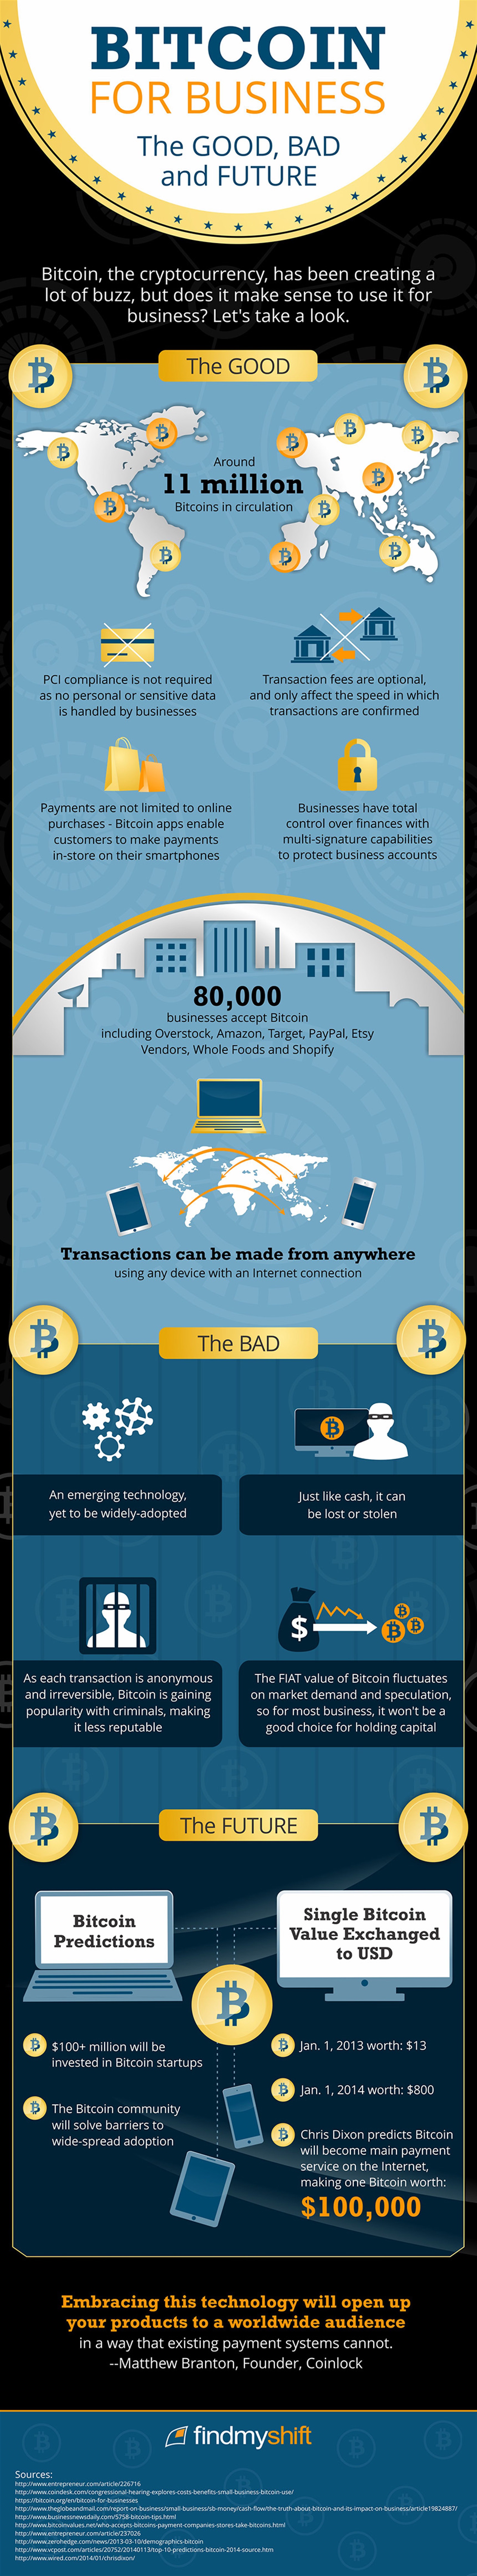 Bitcoin for business - The good, the bad and the future